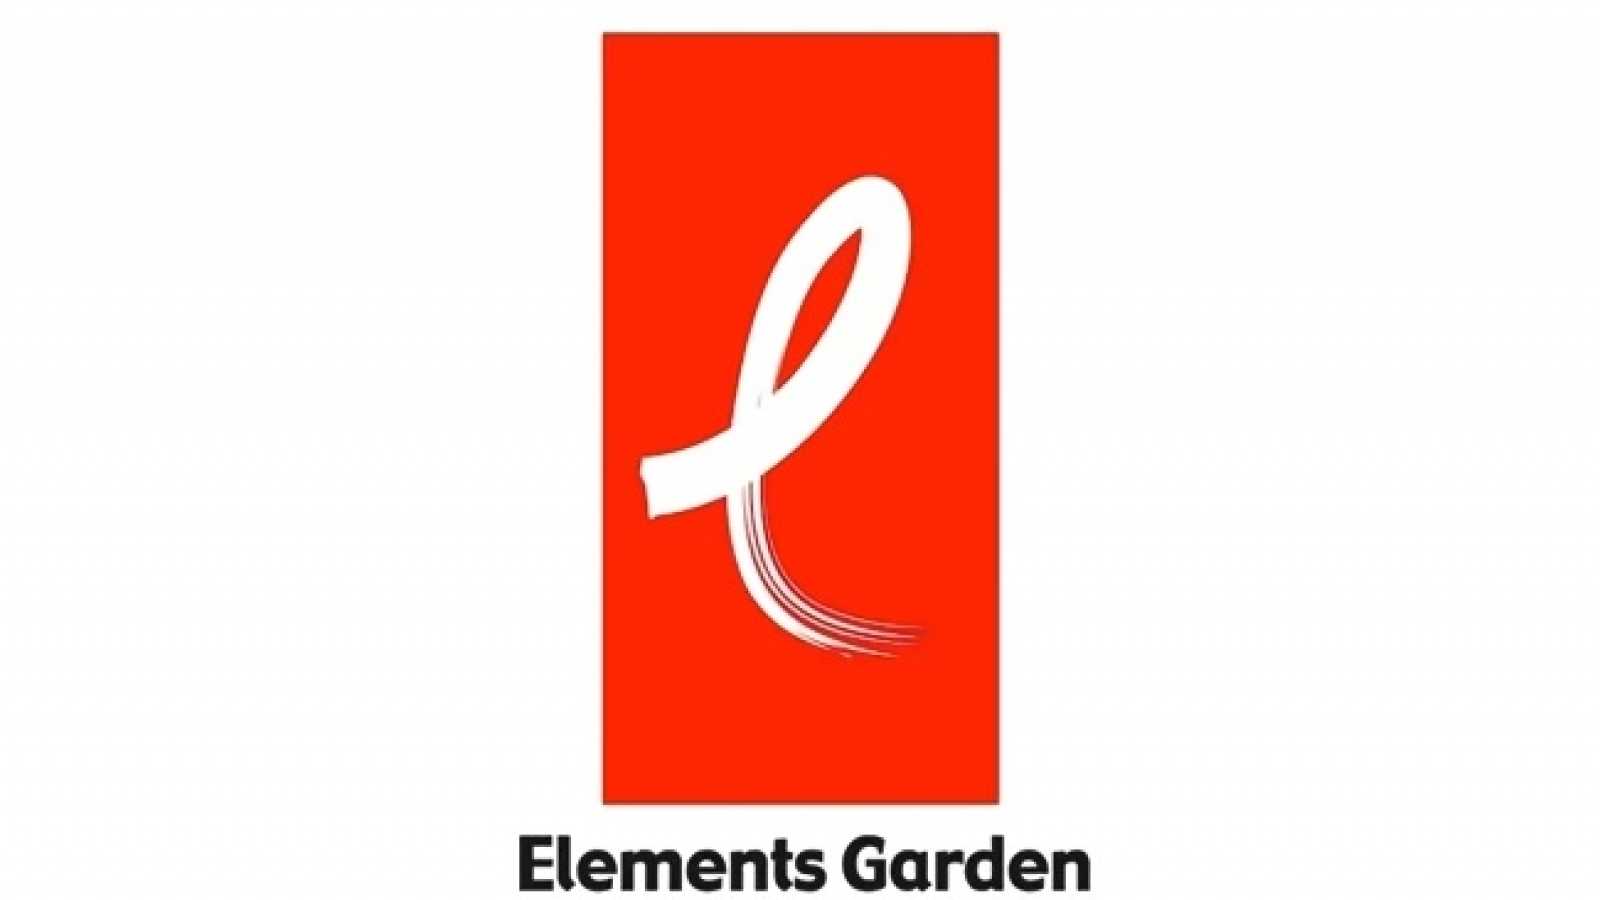 Elements Garden © ARIA Entertainment. All Rights Reserved.